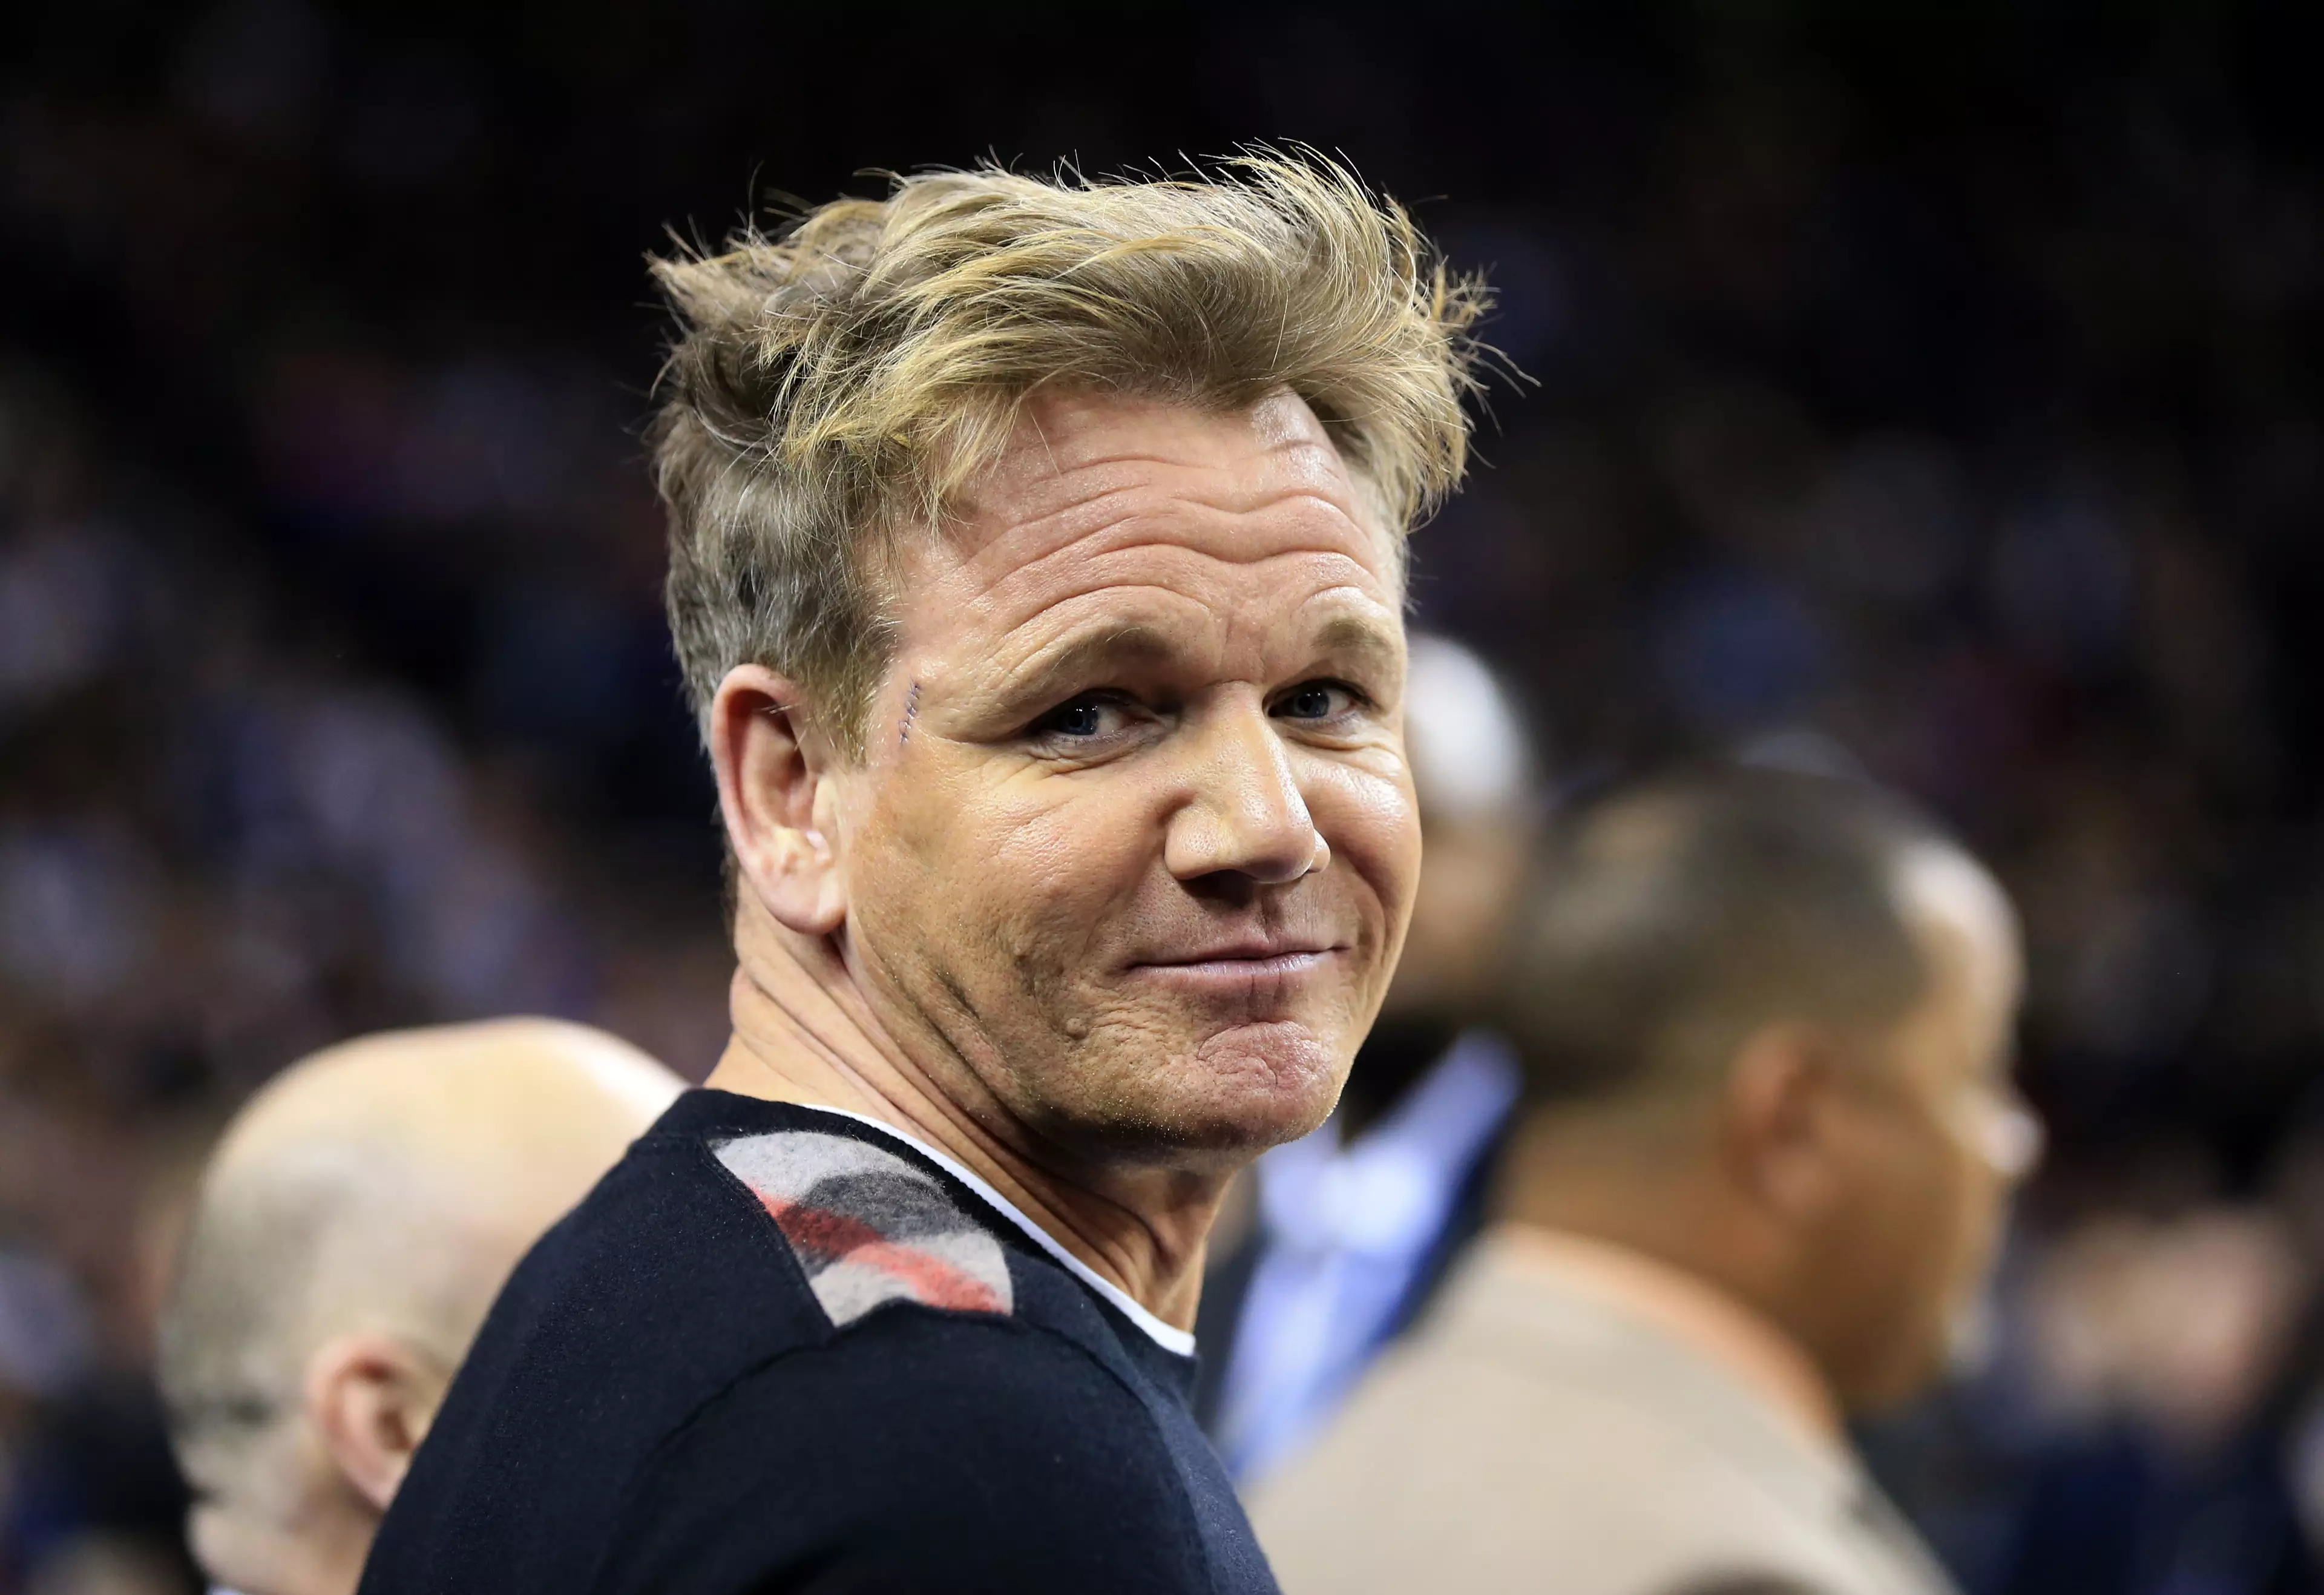 Gordon Ramsay Reveals The One Thing He Absolutely Refuses To Eat